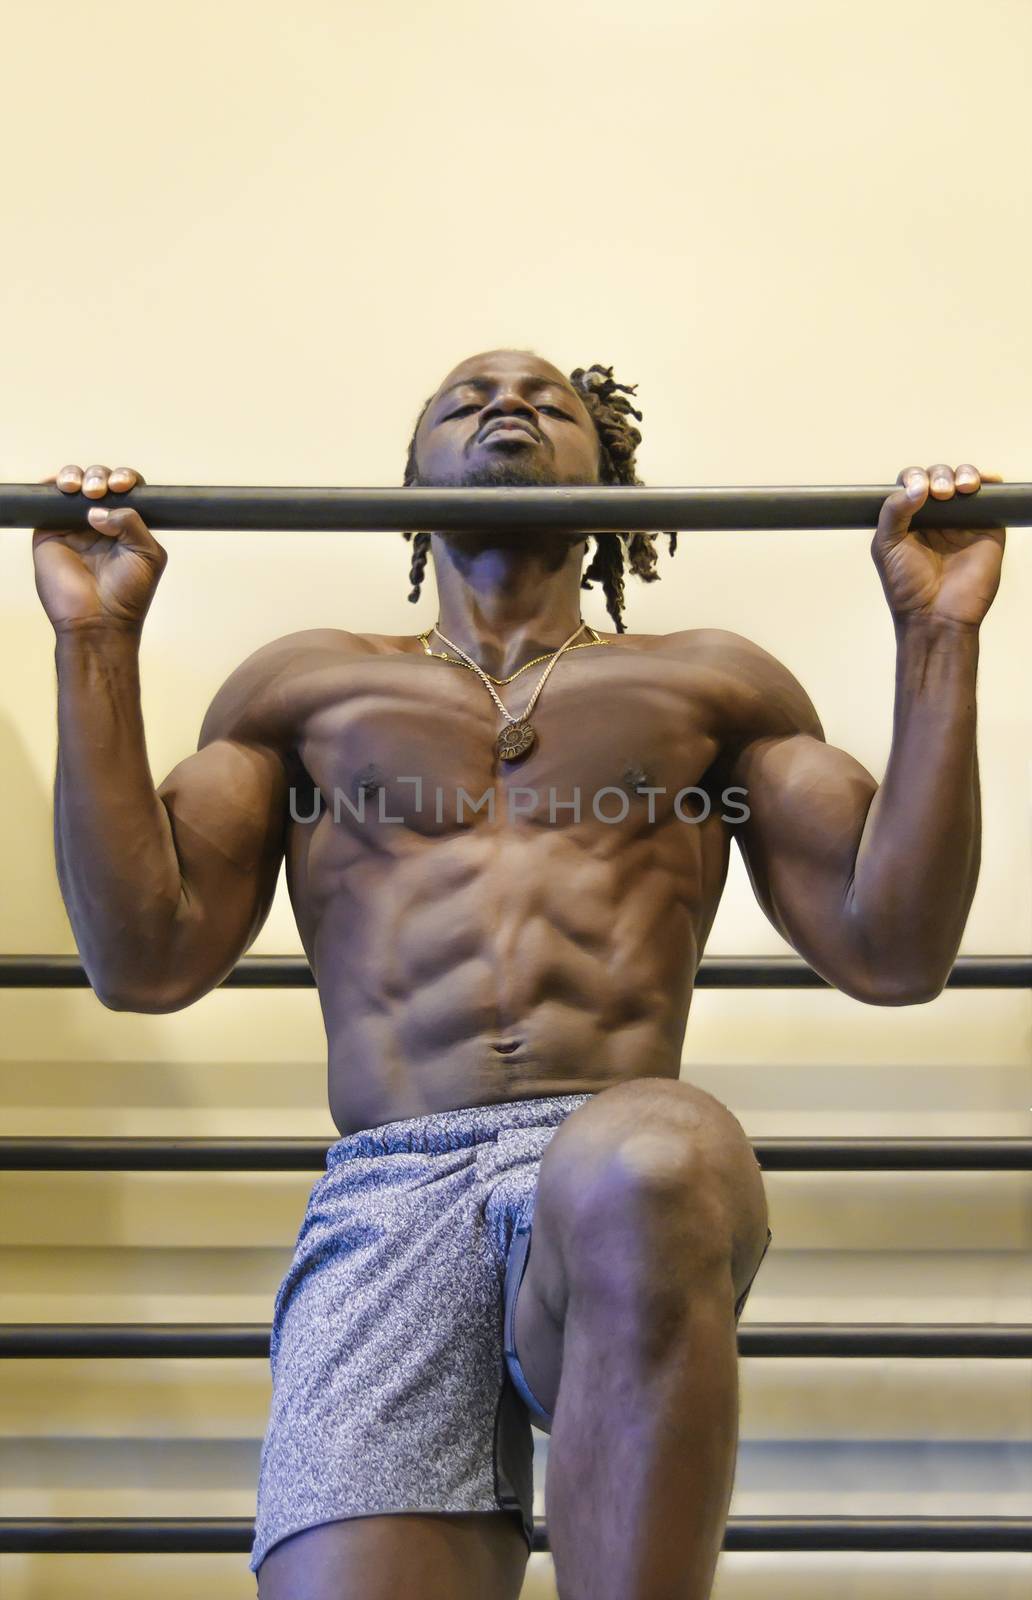 Bodybuilder Doing Pull-Ups in the Gym by whitechild